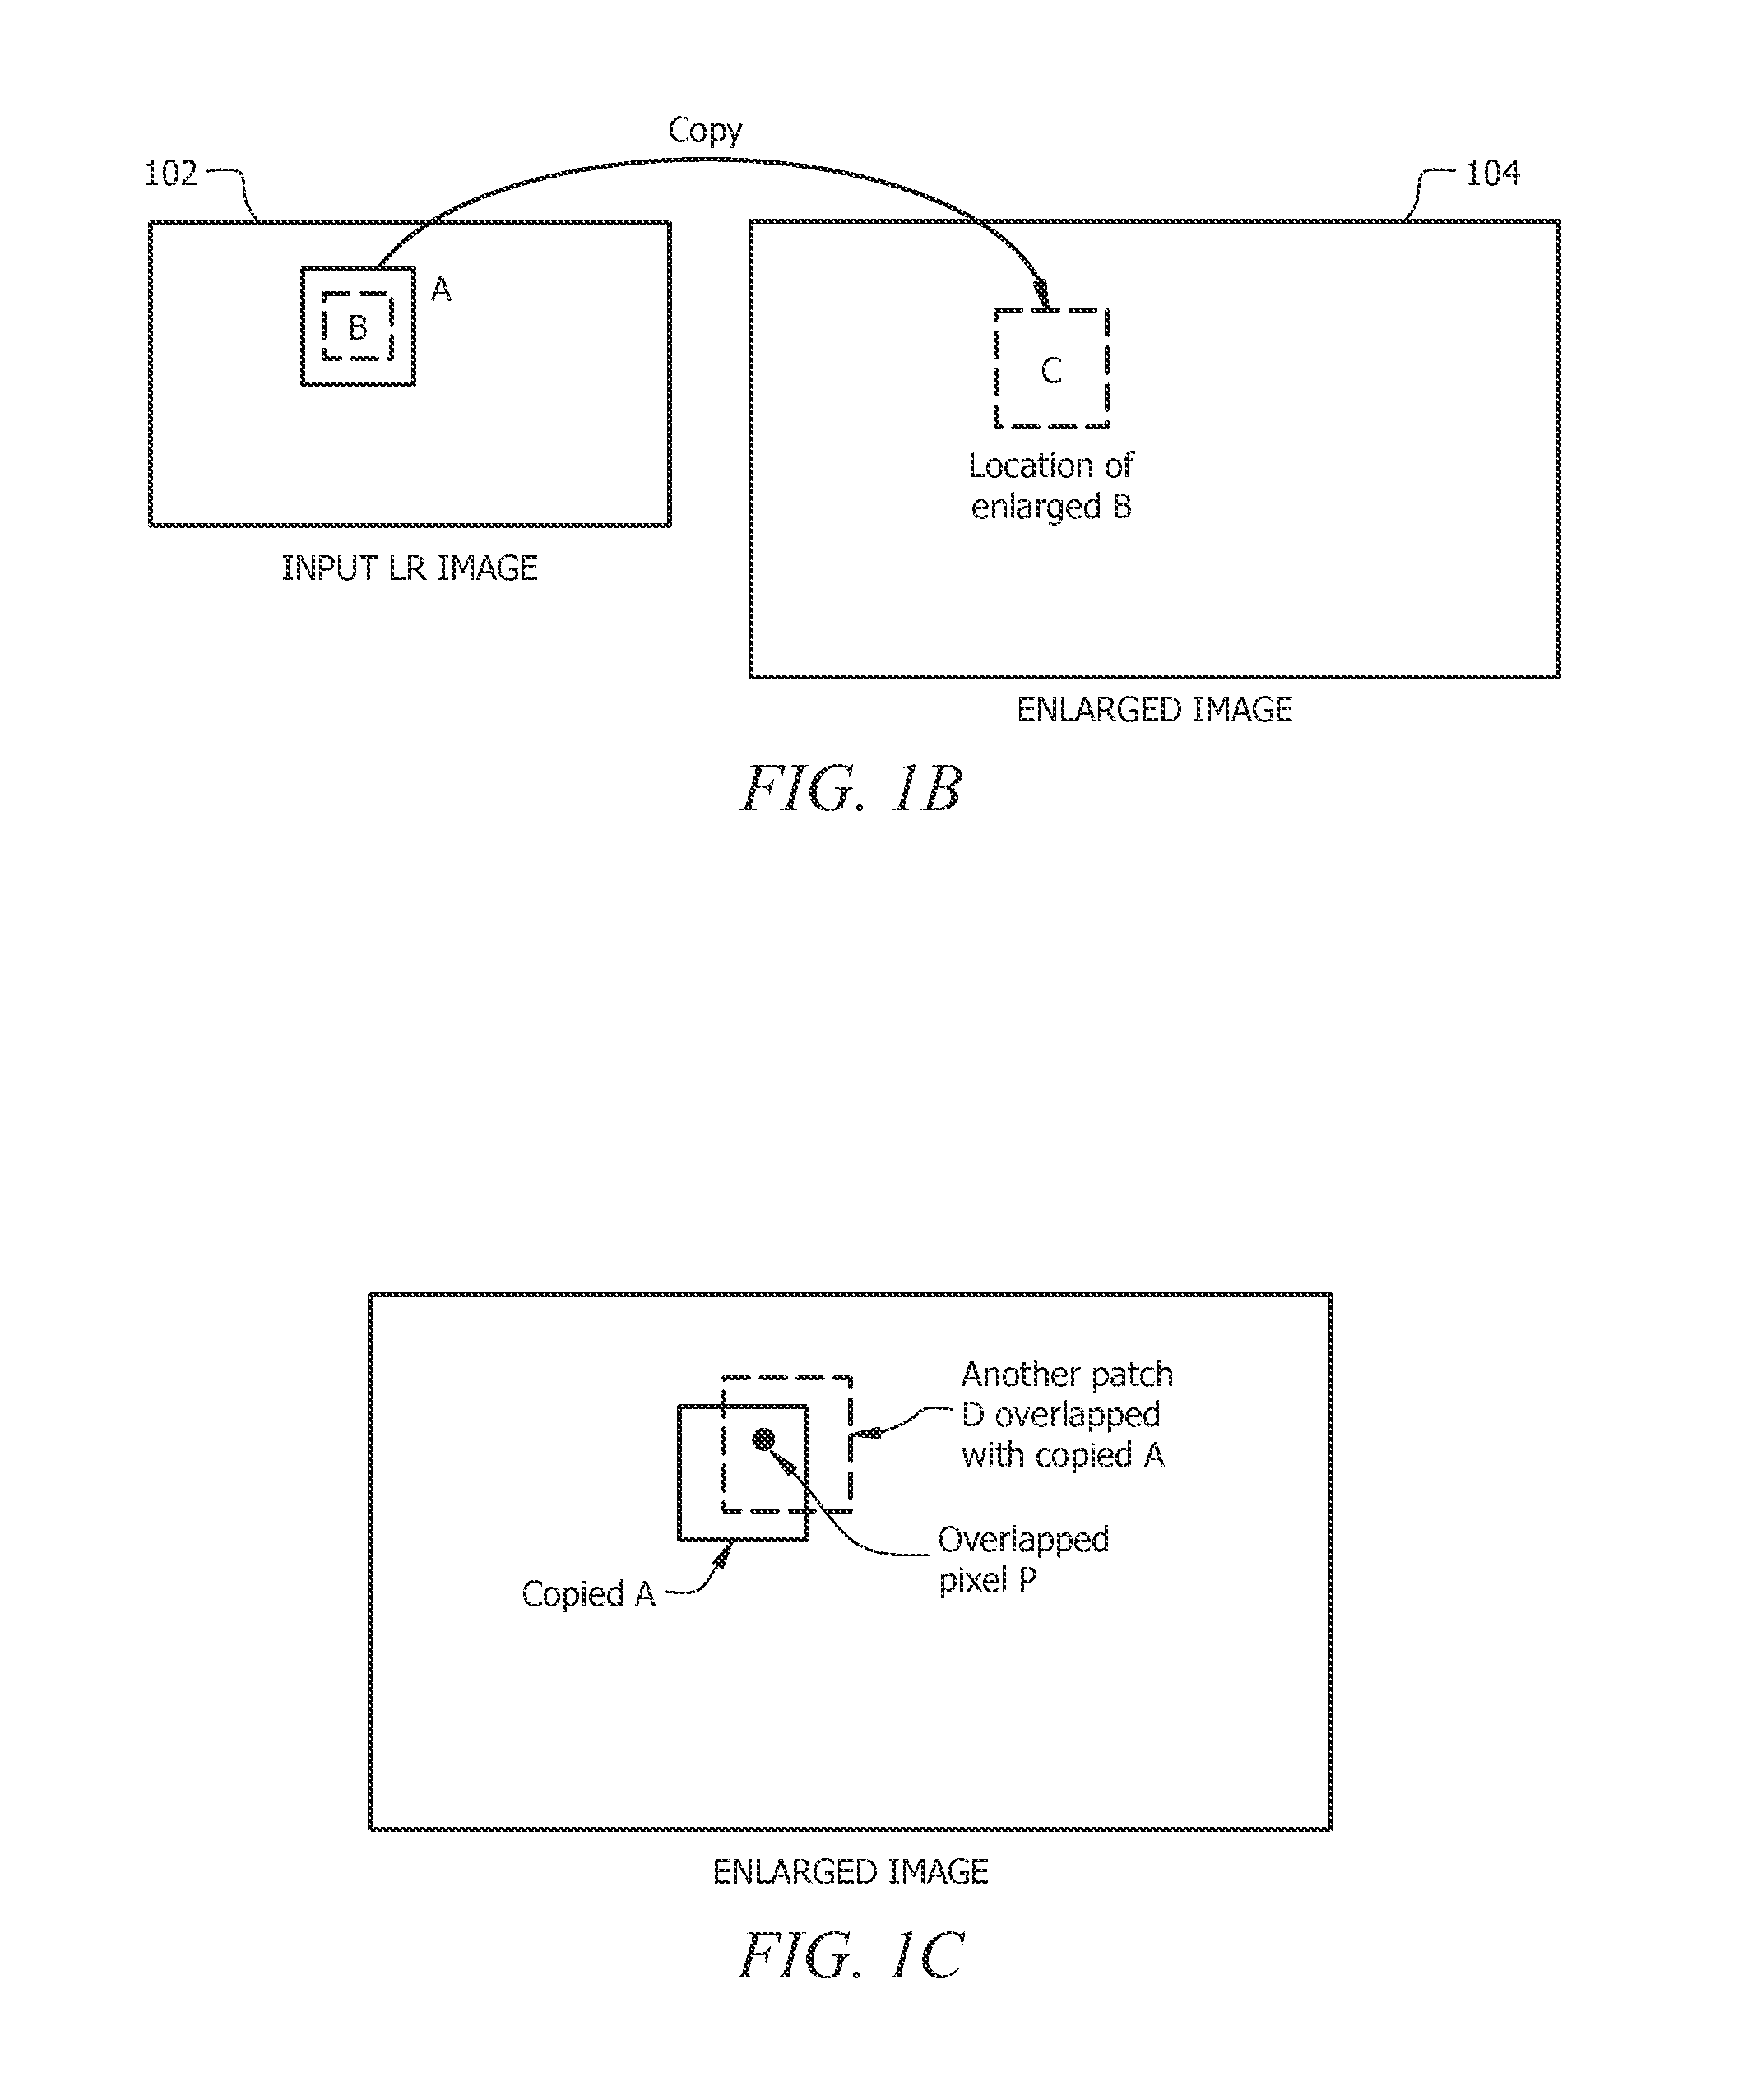 Apparatus, system, and method for multi-patch based super-resolution from an image